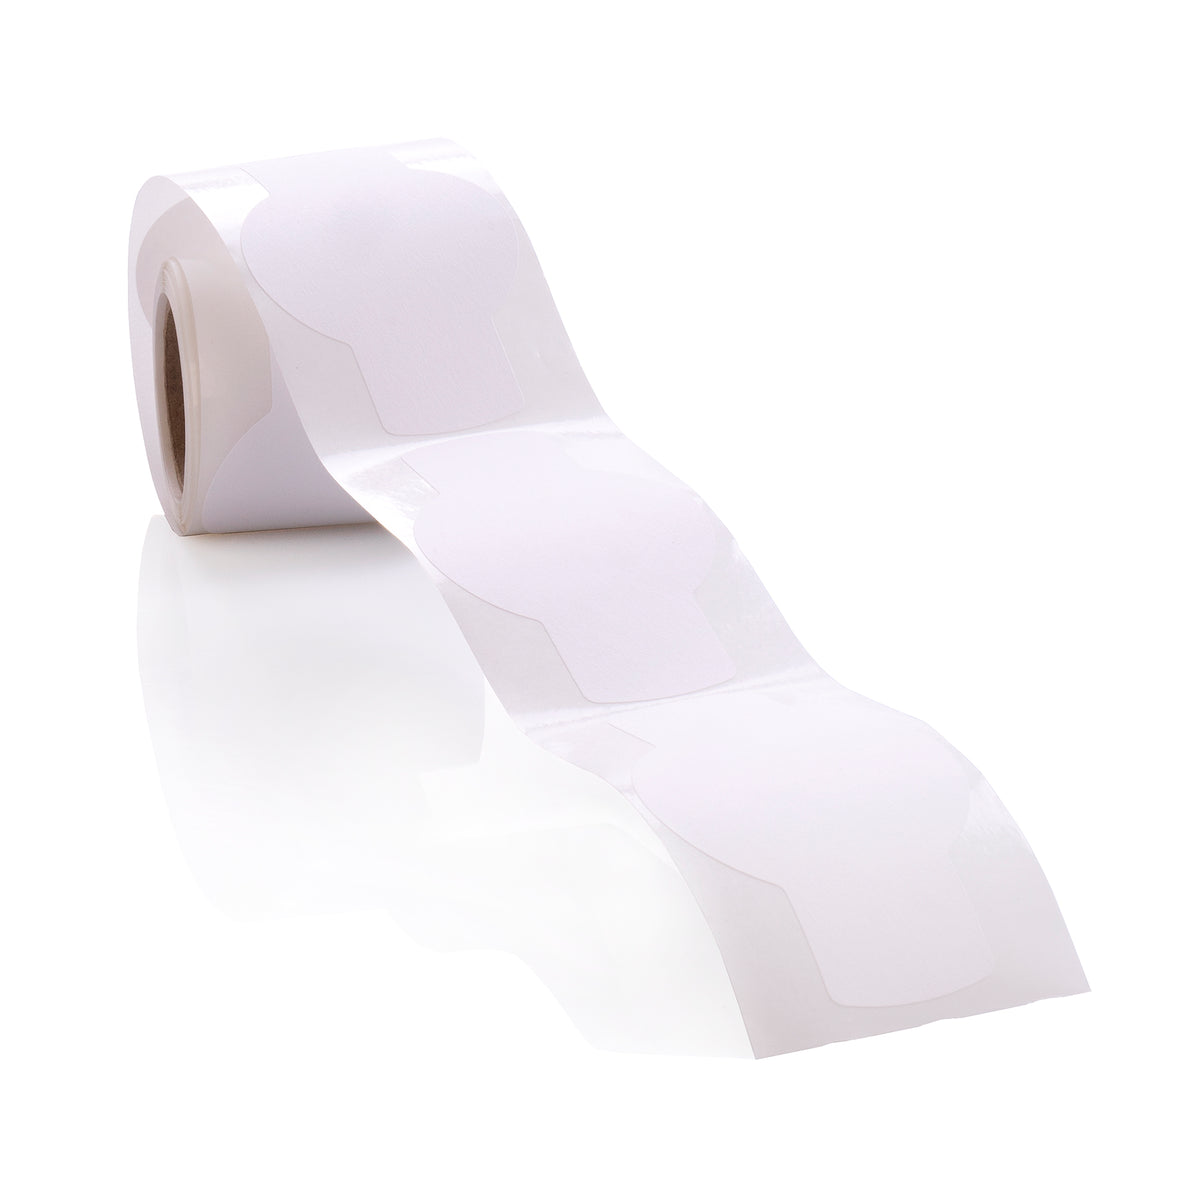 Decorative labels for a jar paper Cotton Touch 100 per roll